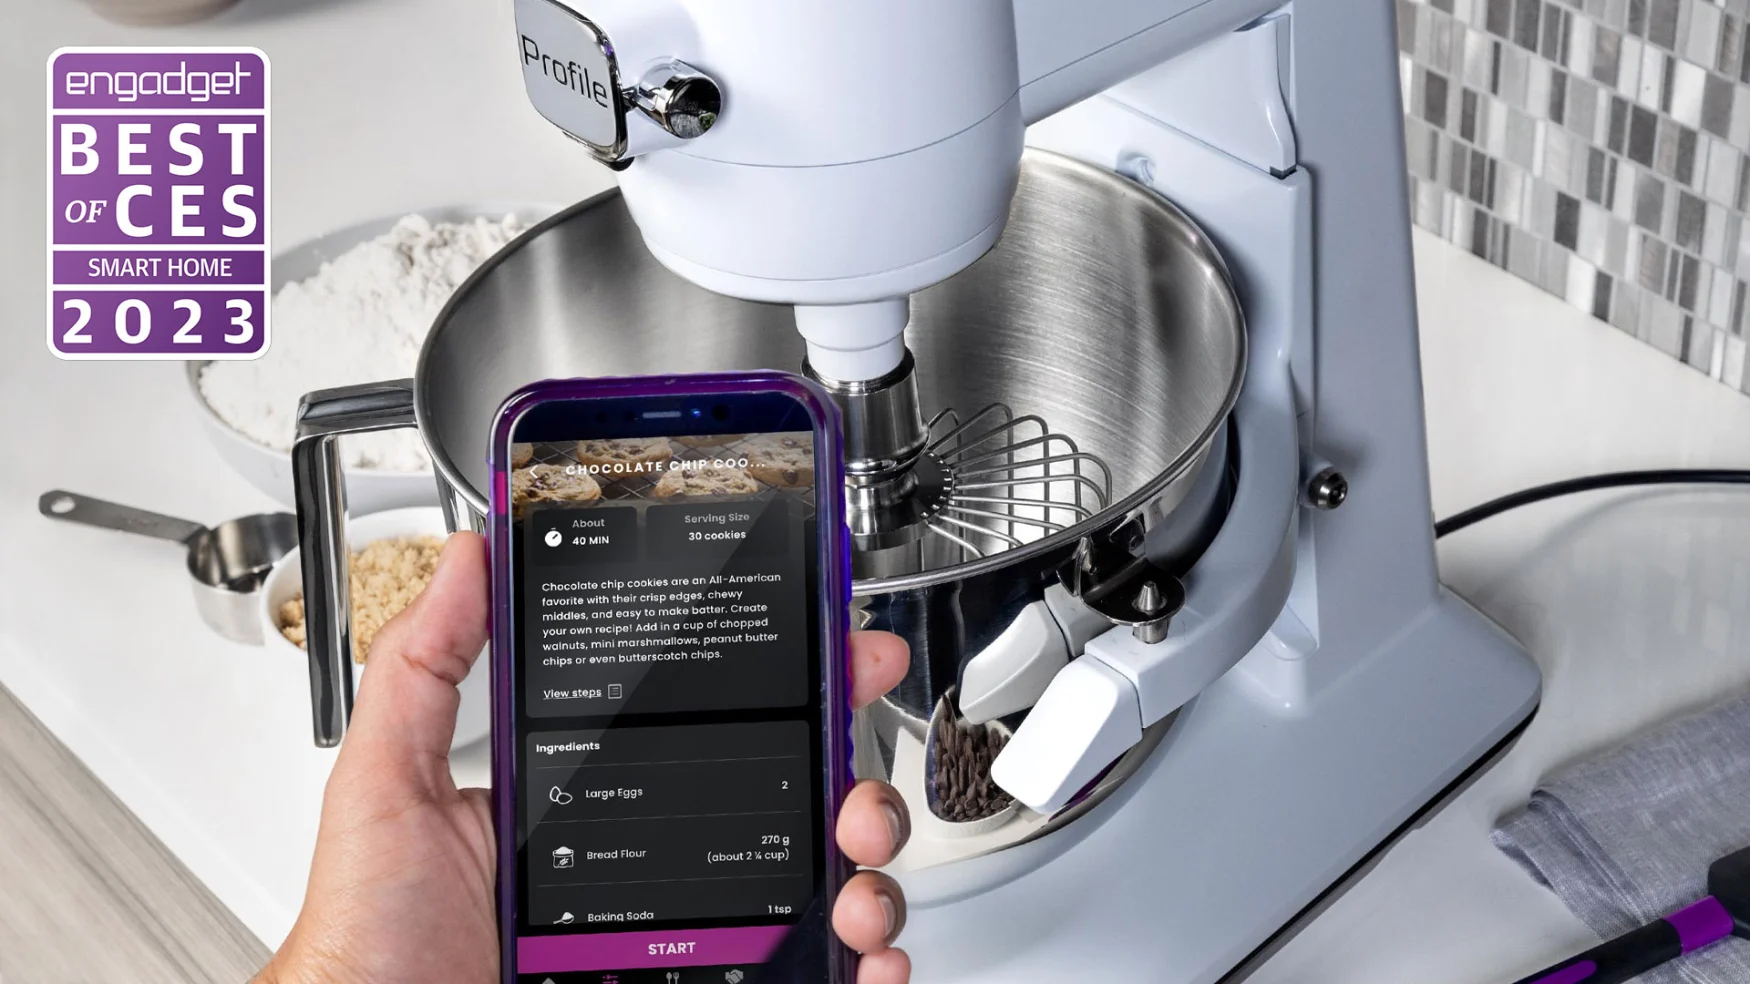 A cropped photo showing someone's hand holding a smartphone in front of a white GE Profile Smart Mixer on a white kitchen counter with grey tiled backsplash.